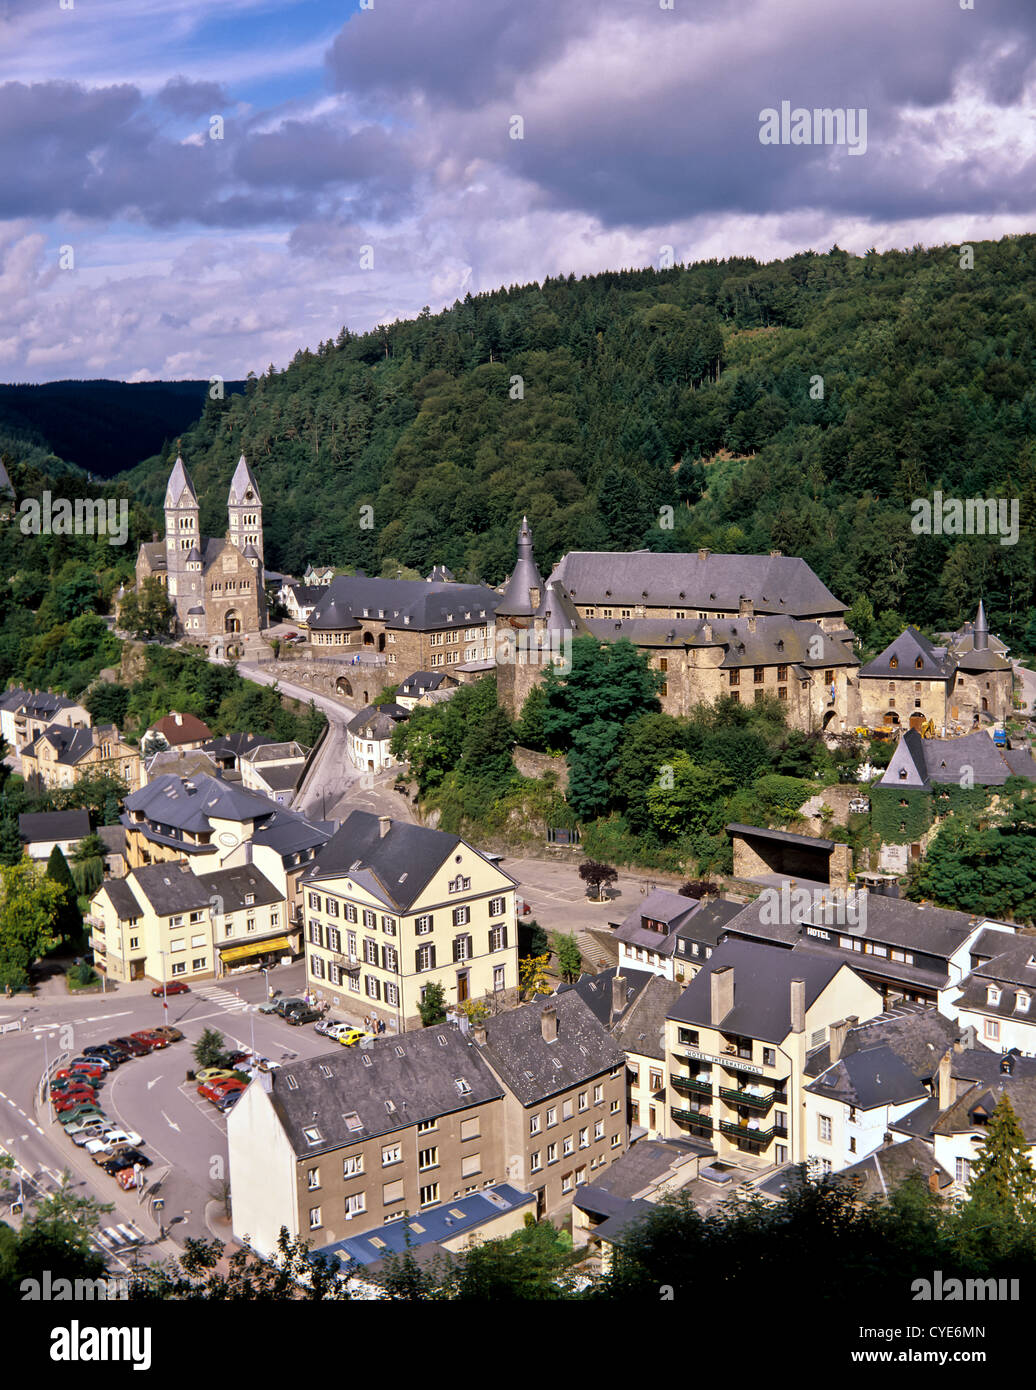 8314. Clarvaux, Luxembourg, Europe Stock Photo